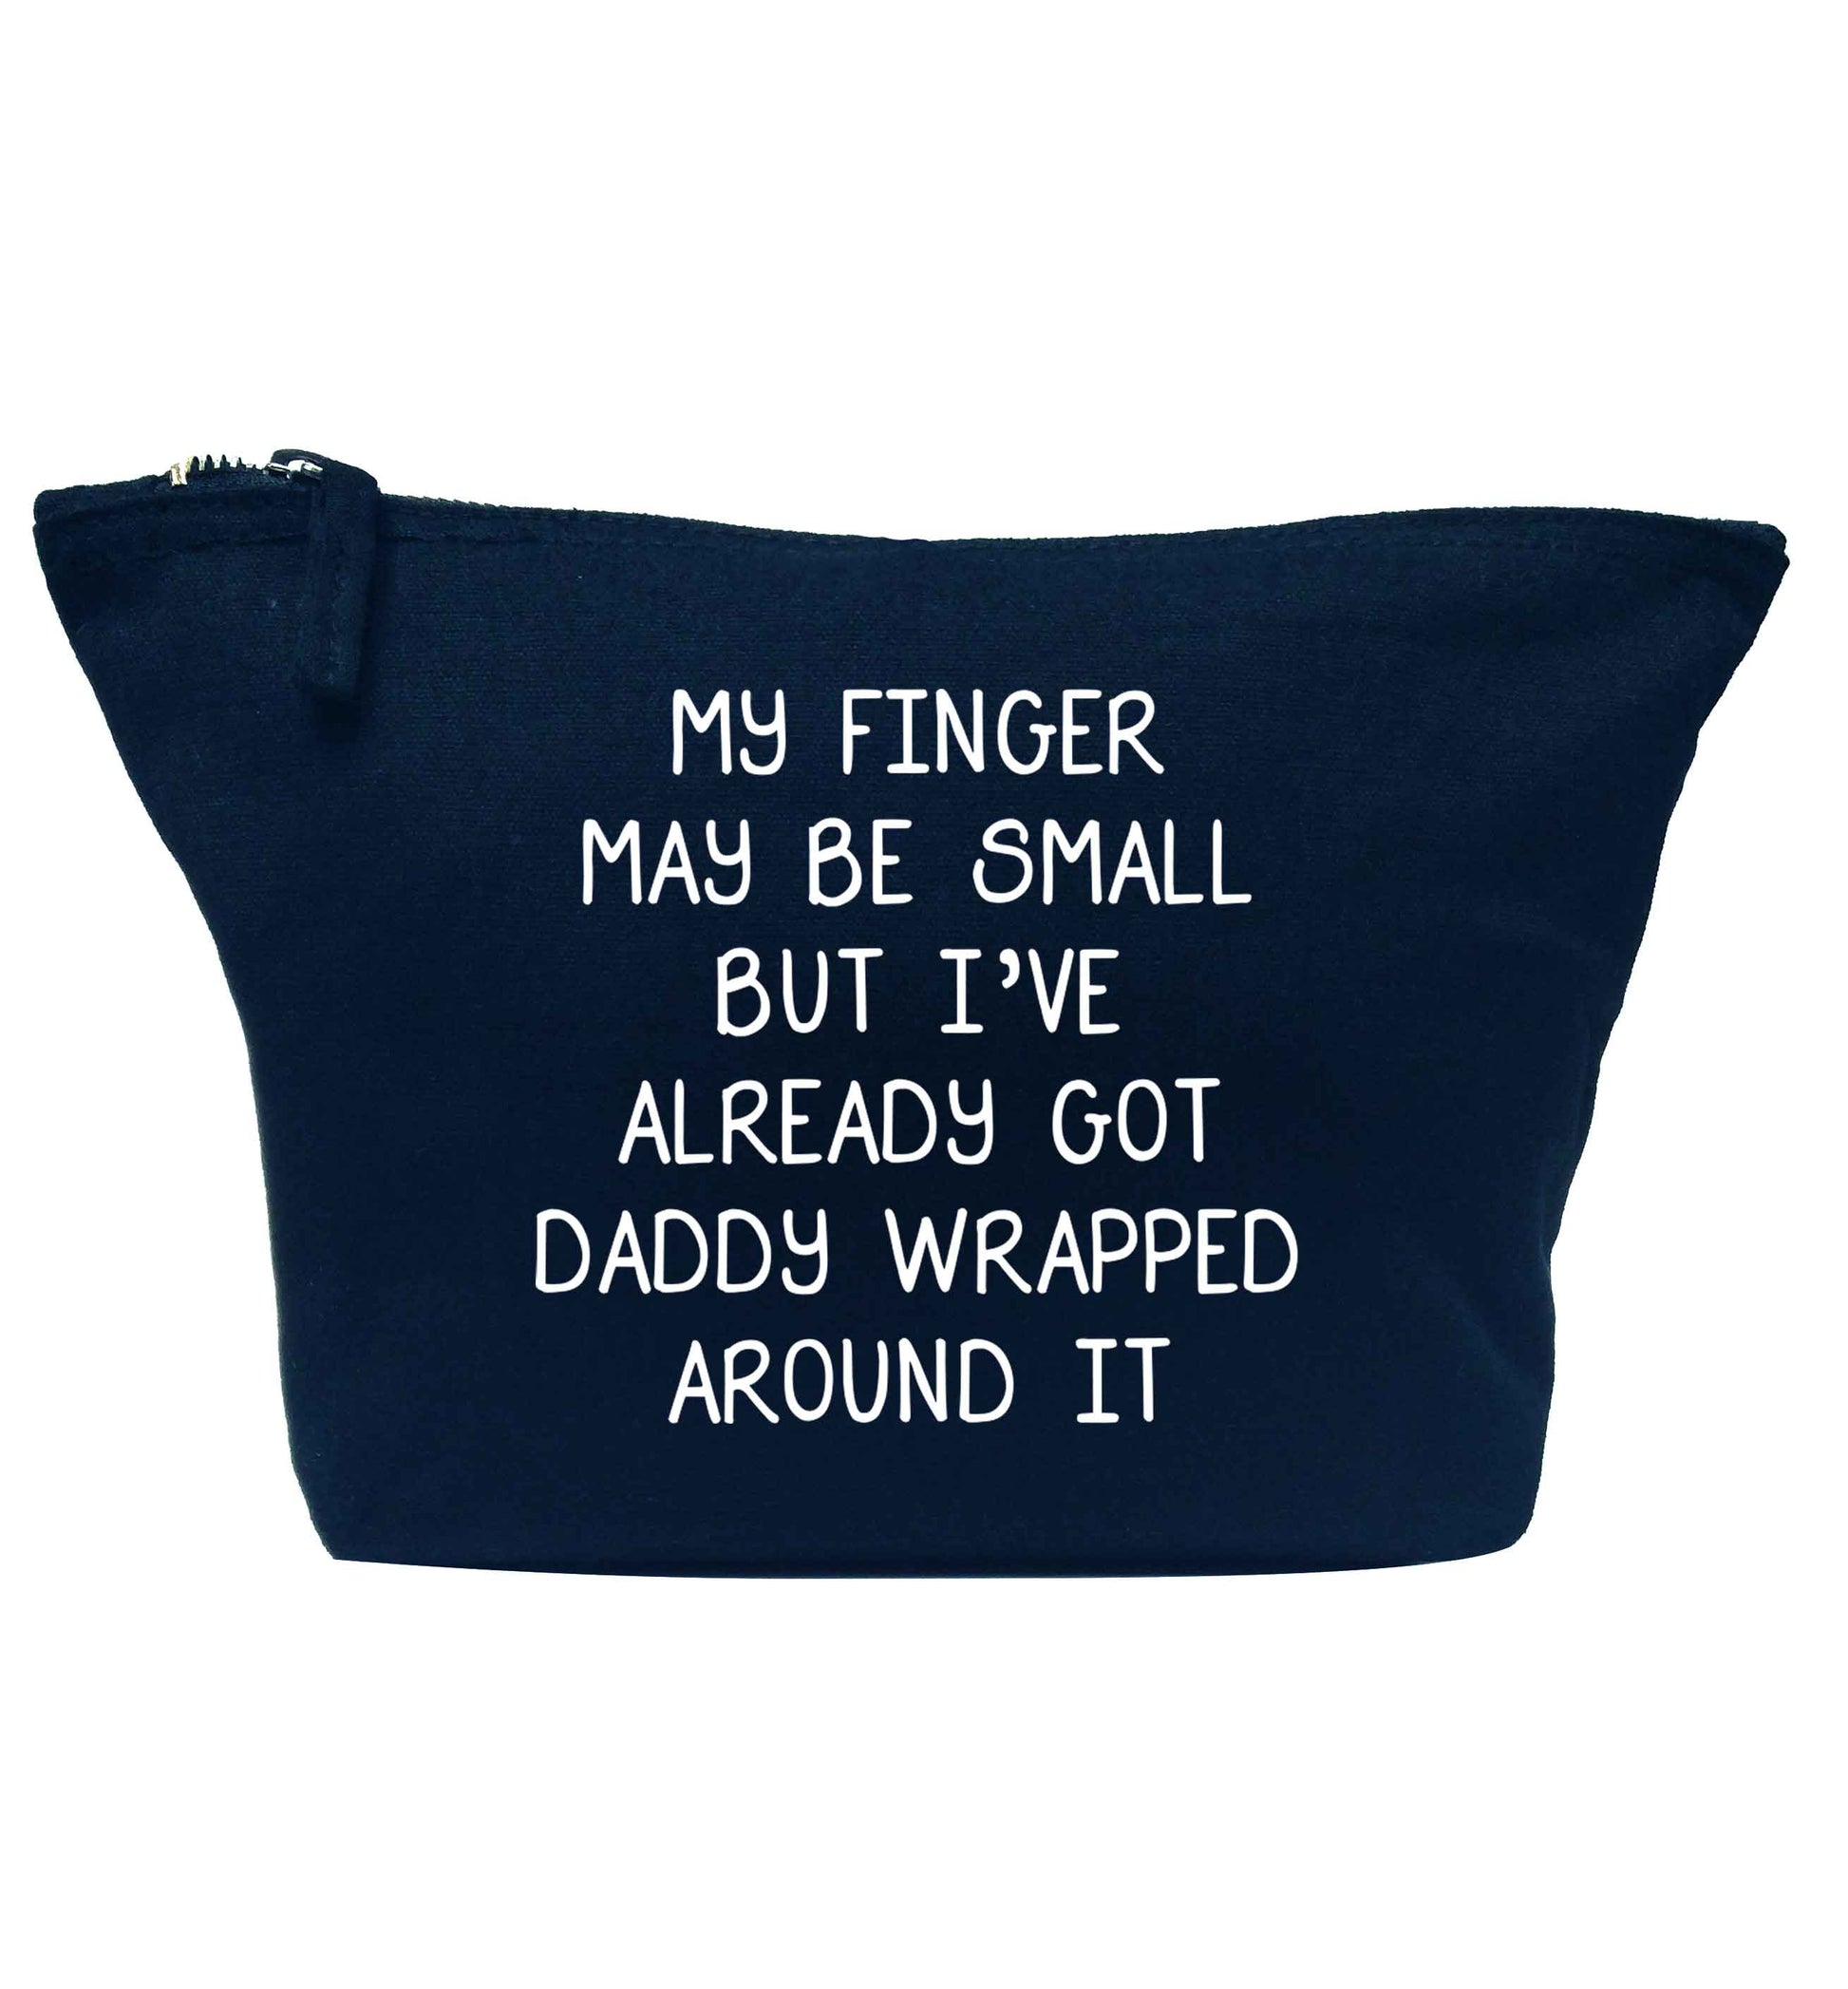 My finger may be small but I've already got daddy wrapped around it navy makeup bag